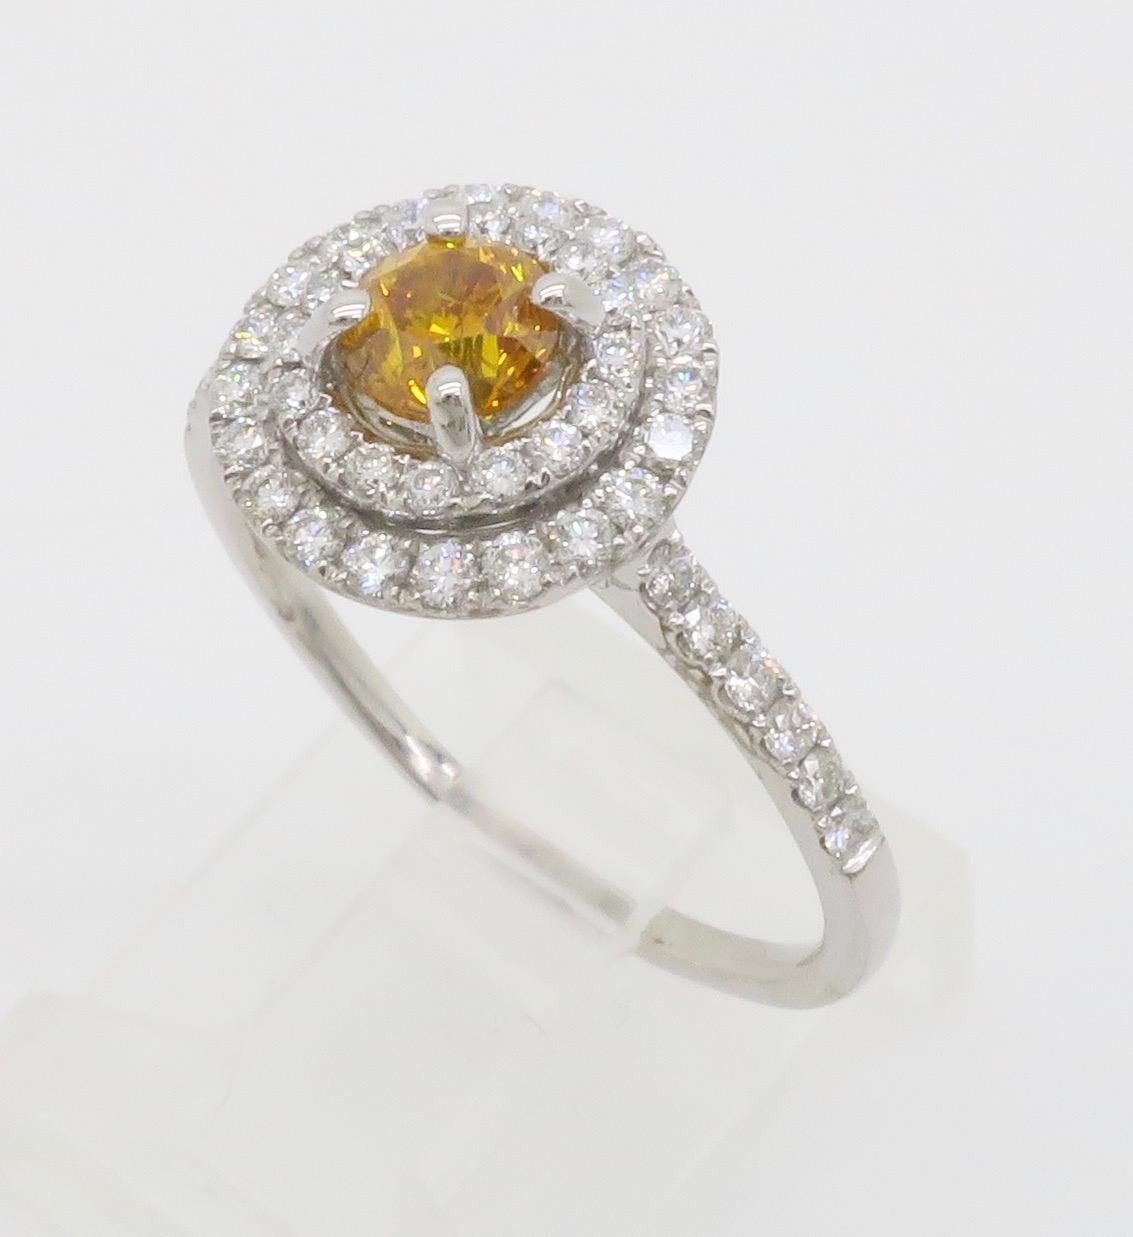 GIA Certified Natural Fancy Vivid Yellow-Orange Double Halo Diamond Ring in 18k  For Sale 2